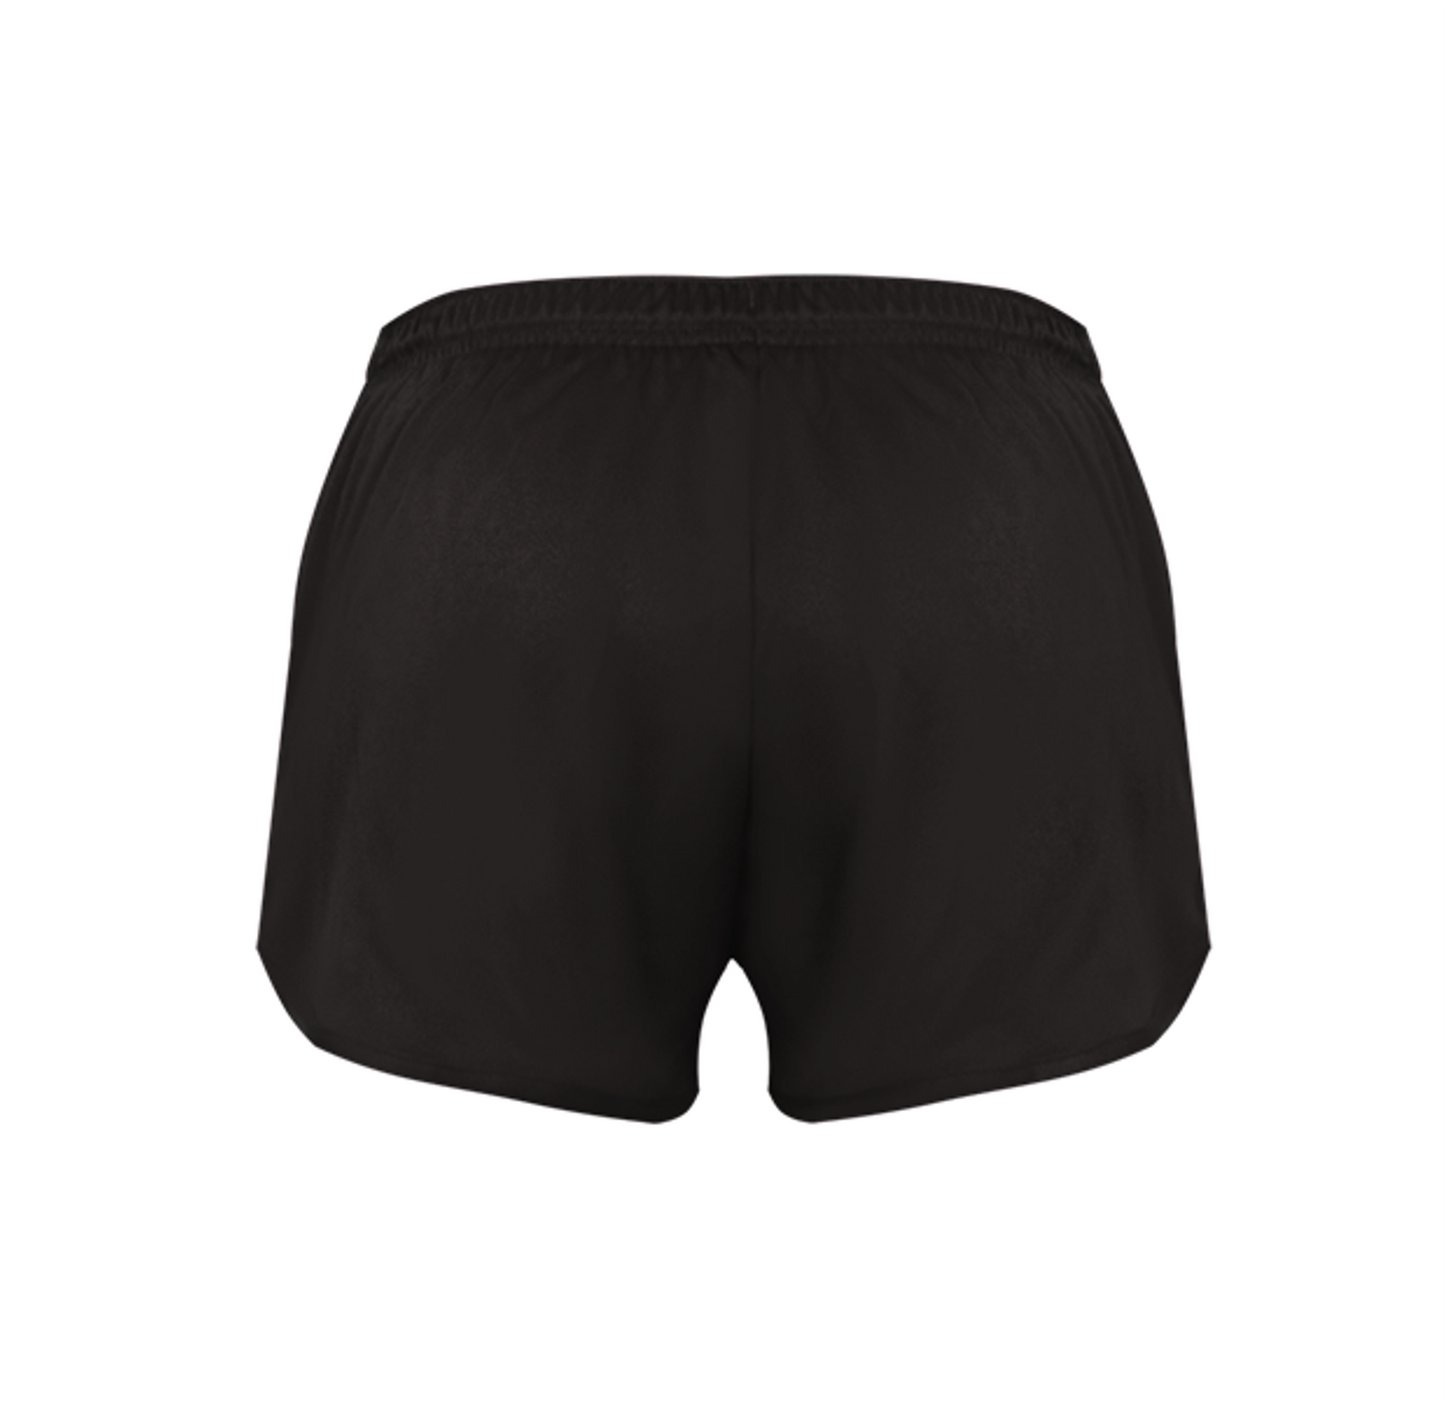 Brussels LC Women's Shorts